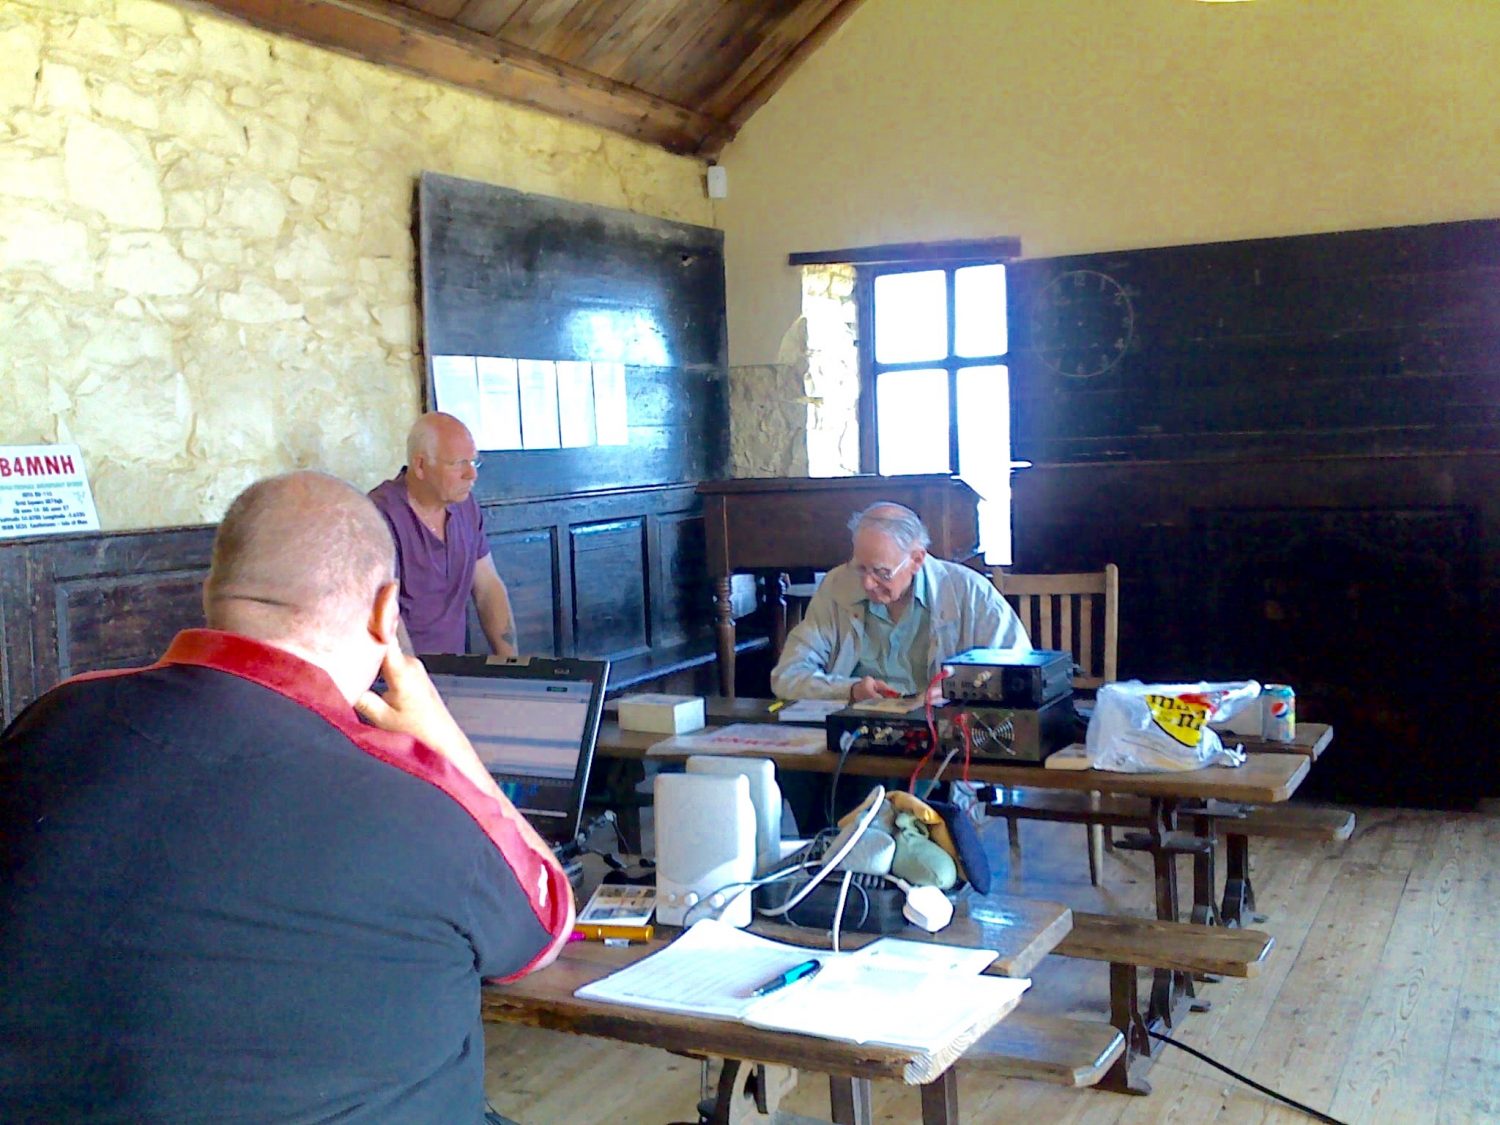 The 2010 GB4MNH Event Station with Dave Cain (2D0YLX), Paul MacGraff (MD0BCI) and one Unknown.